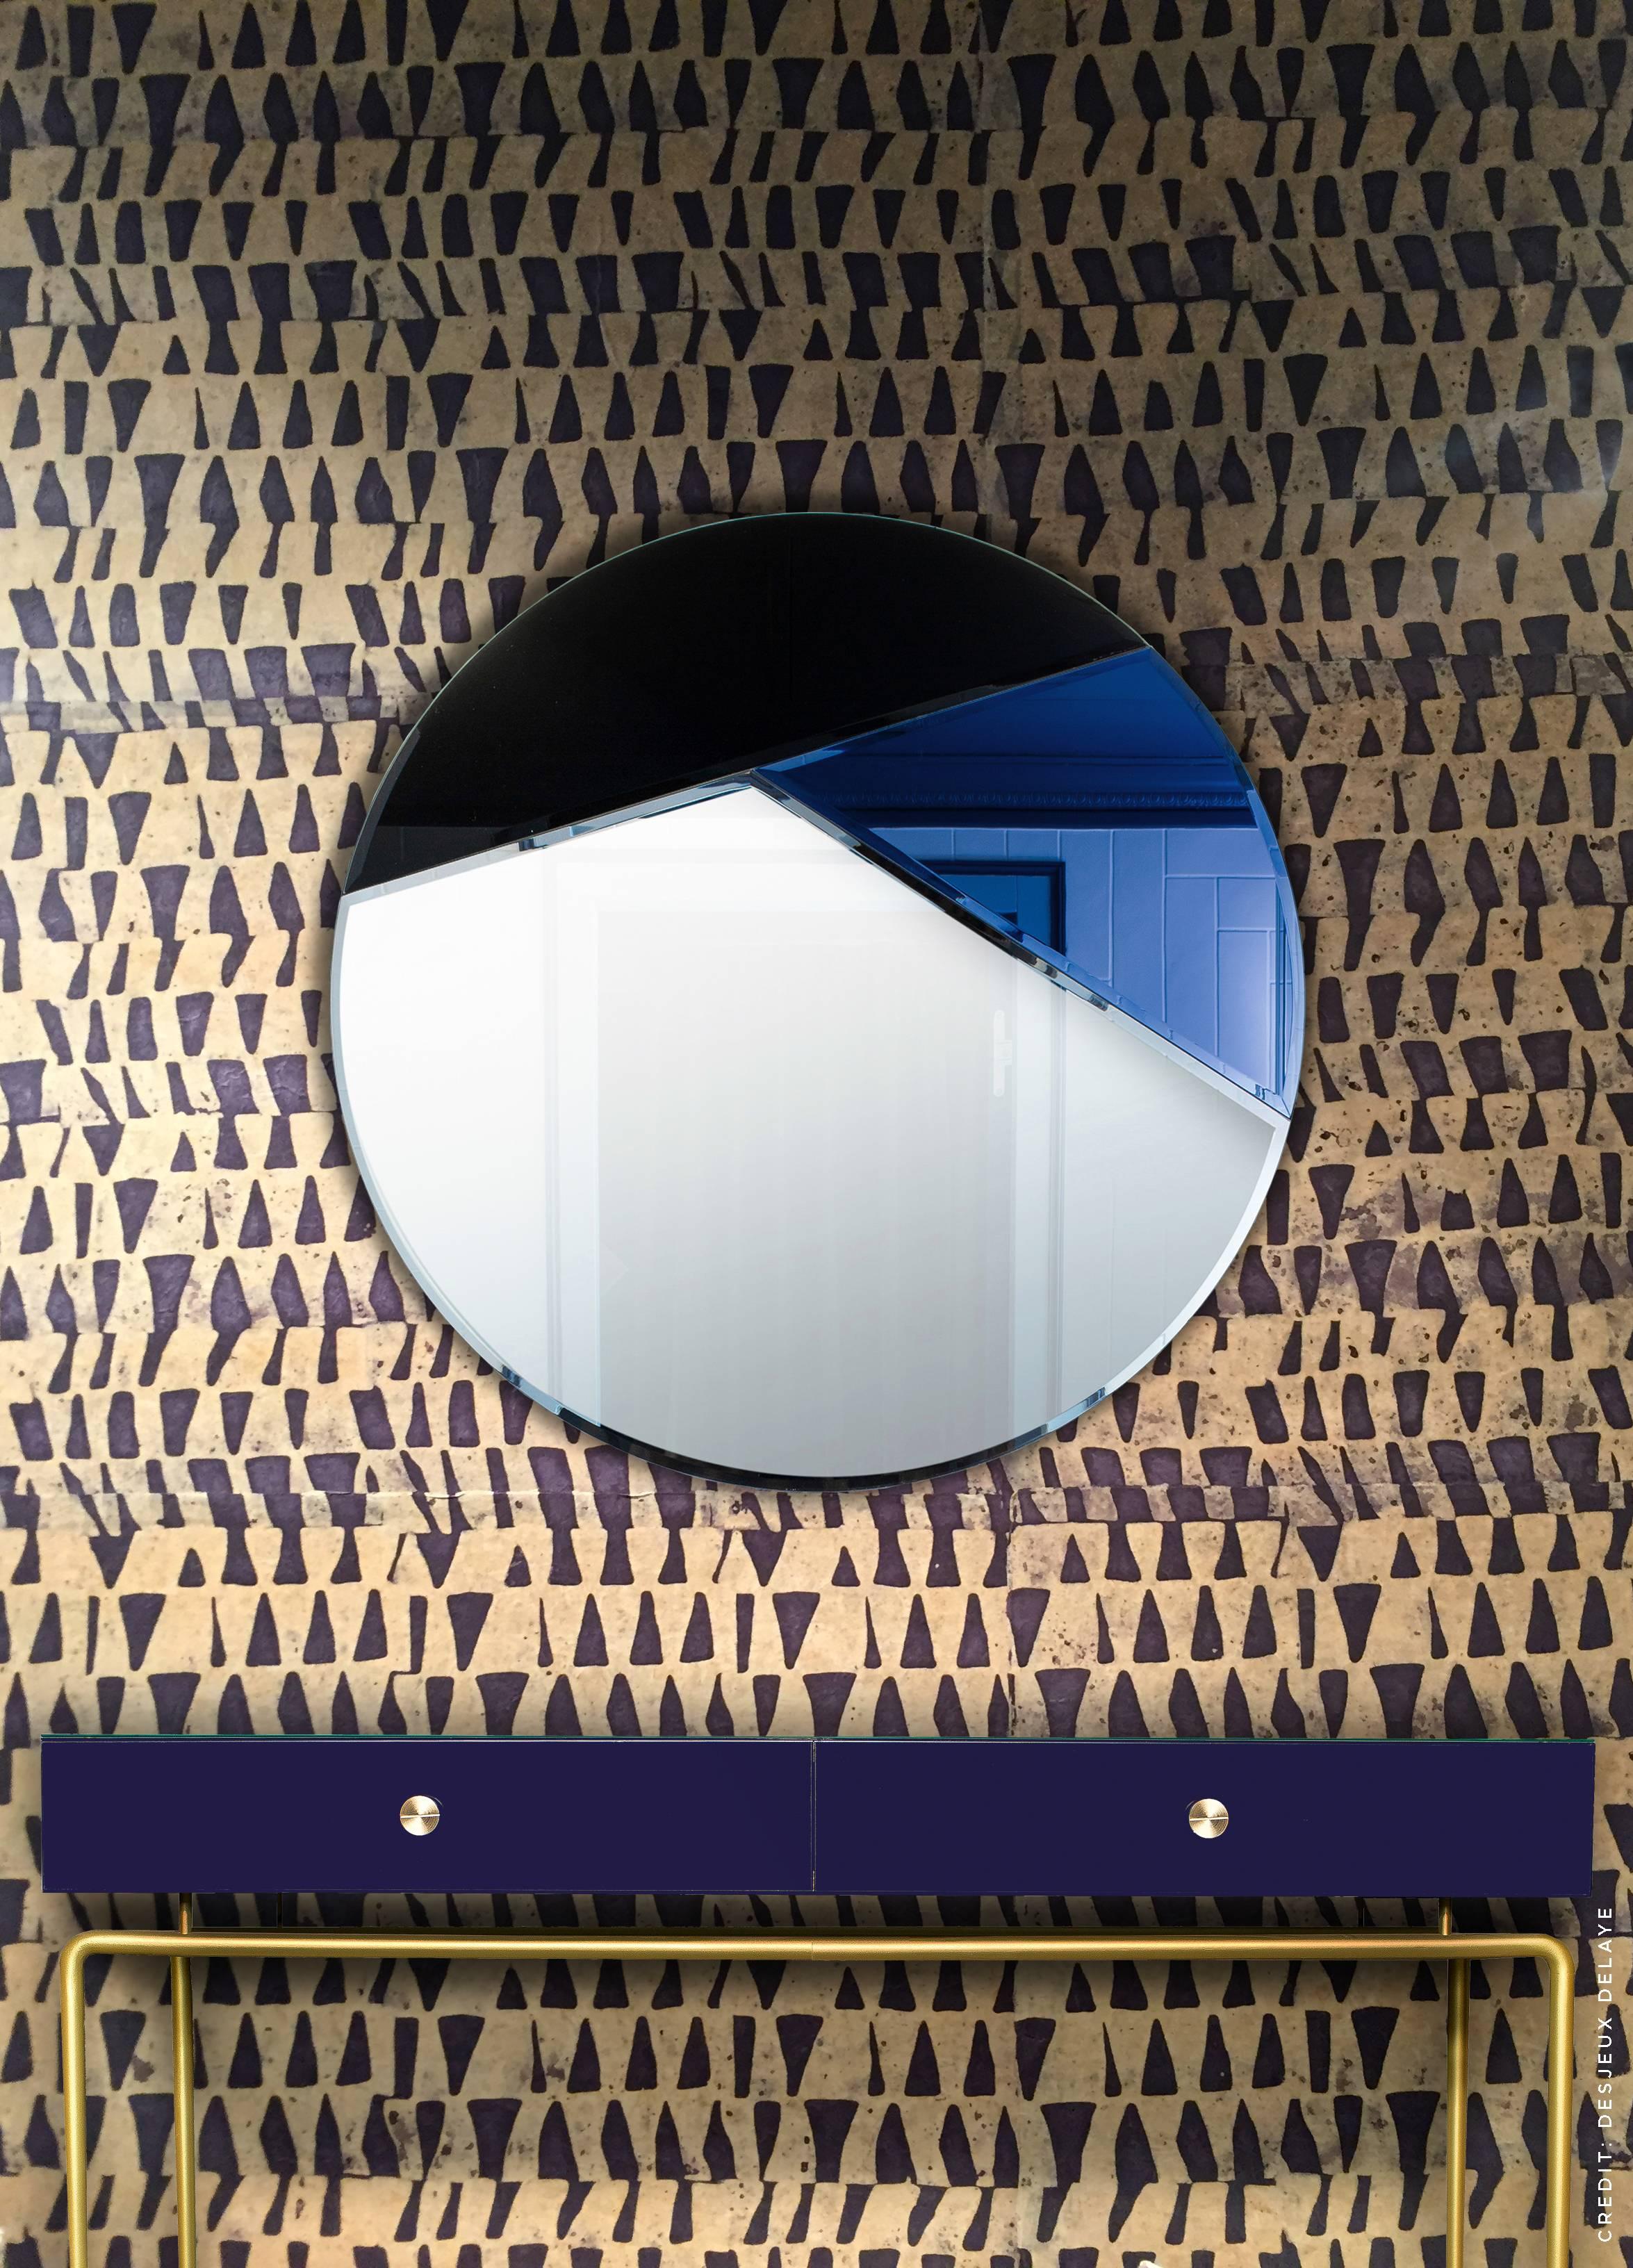 Nouveau design colorful mirror Nouveau 80
Mirror
4 mm faceted mirror on black painted mdf
Diameter: 80 cm

Nouveau 80
The Nouveau 70/80/90 round mirror series unites elegance with simplicity and is characterised by its geometric color